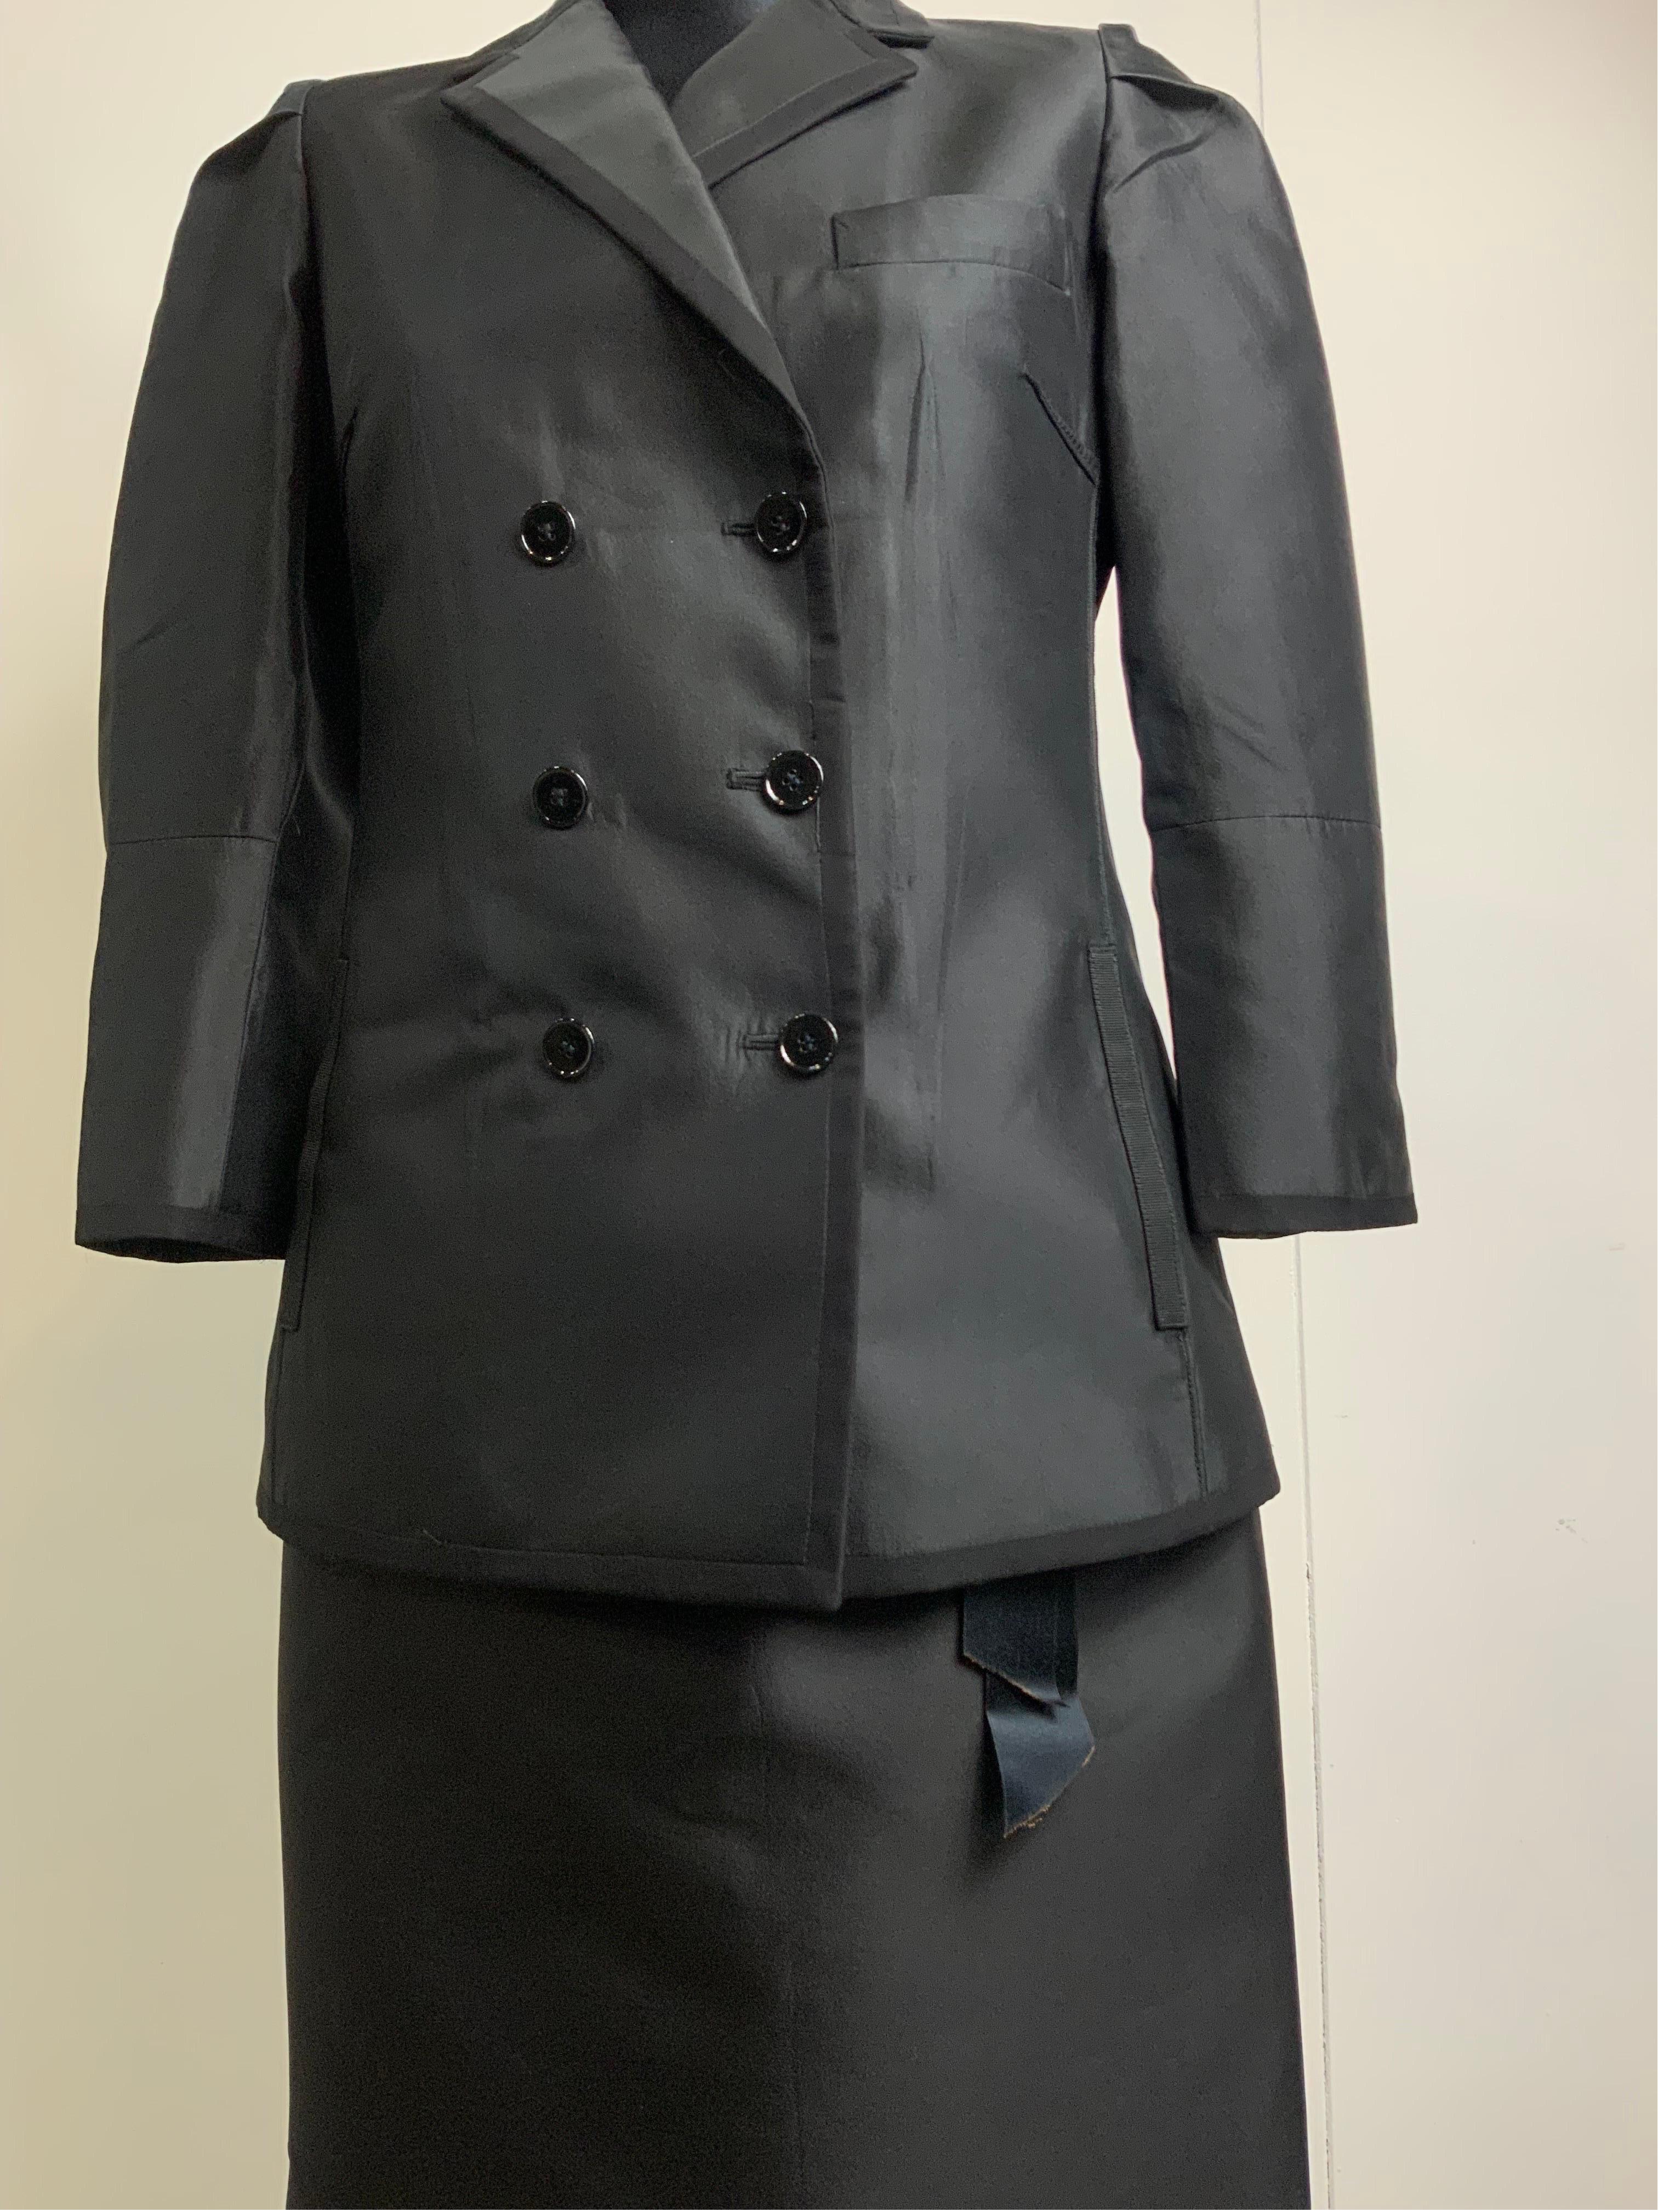 Dolce and Gabbana suit. Skirt and jacket.
Composition label missing on jacket. Silk lined.
The skirt is made of silk. Lined.
Italian size 38.
Shoulders 40 cm
Bust 42 cm
Length 72 cm
The skirt closes with a rear zip.
Waist 33 cm
Length 58 cm
In good